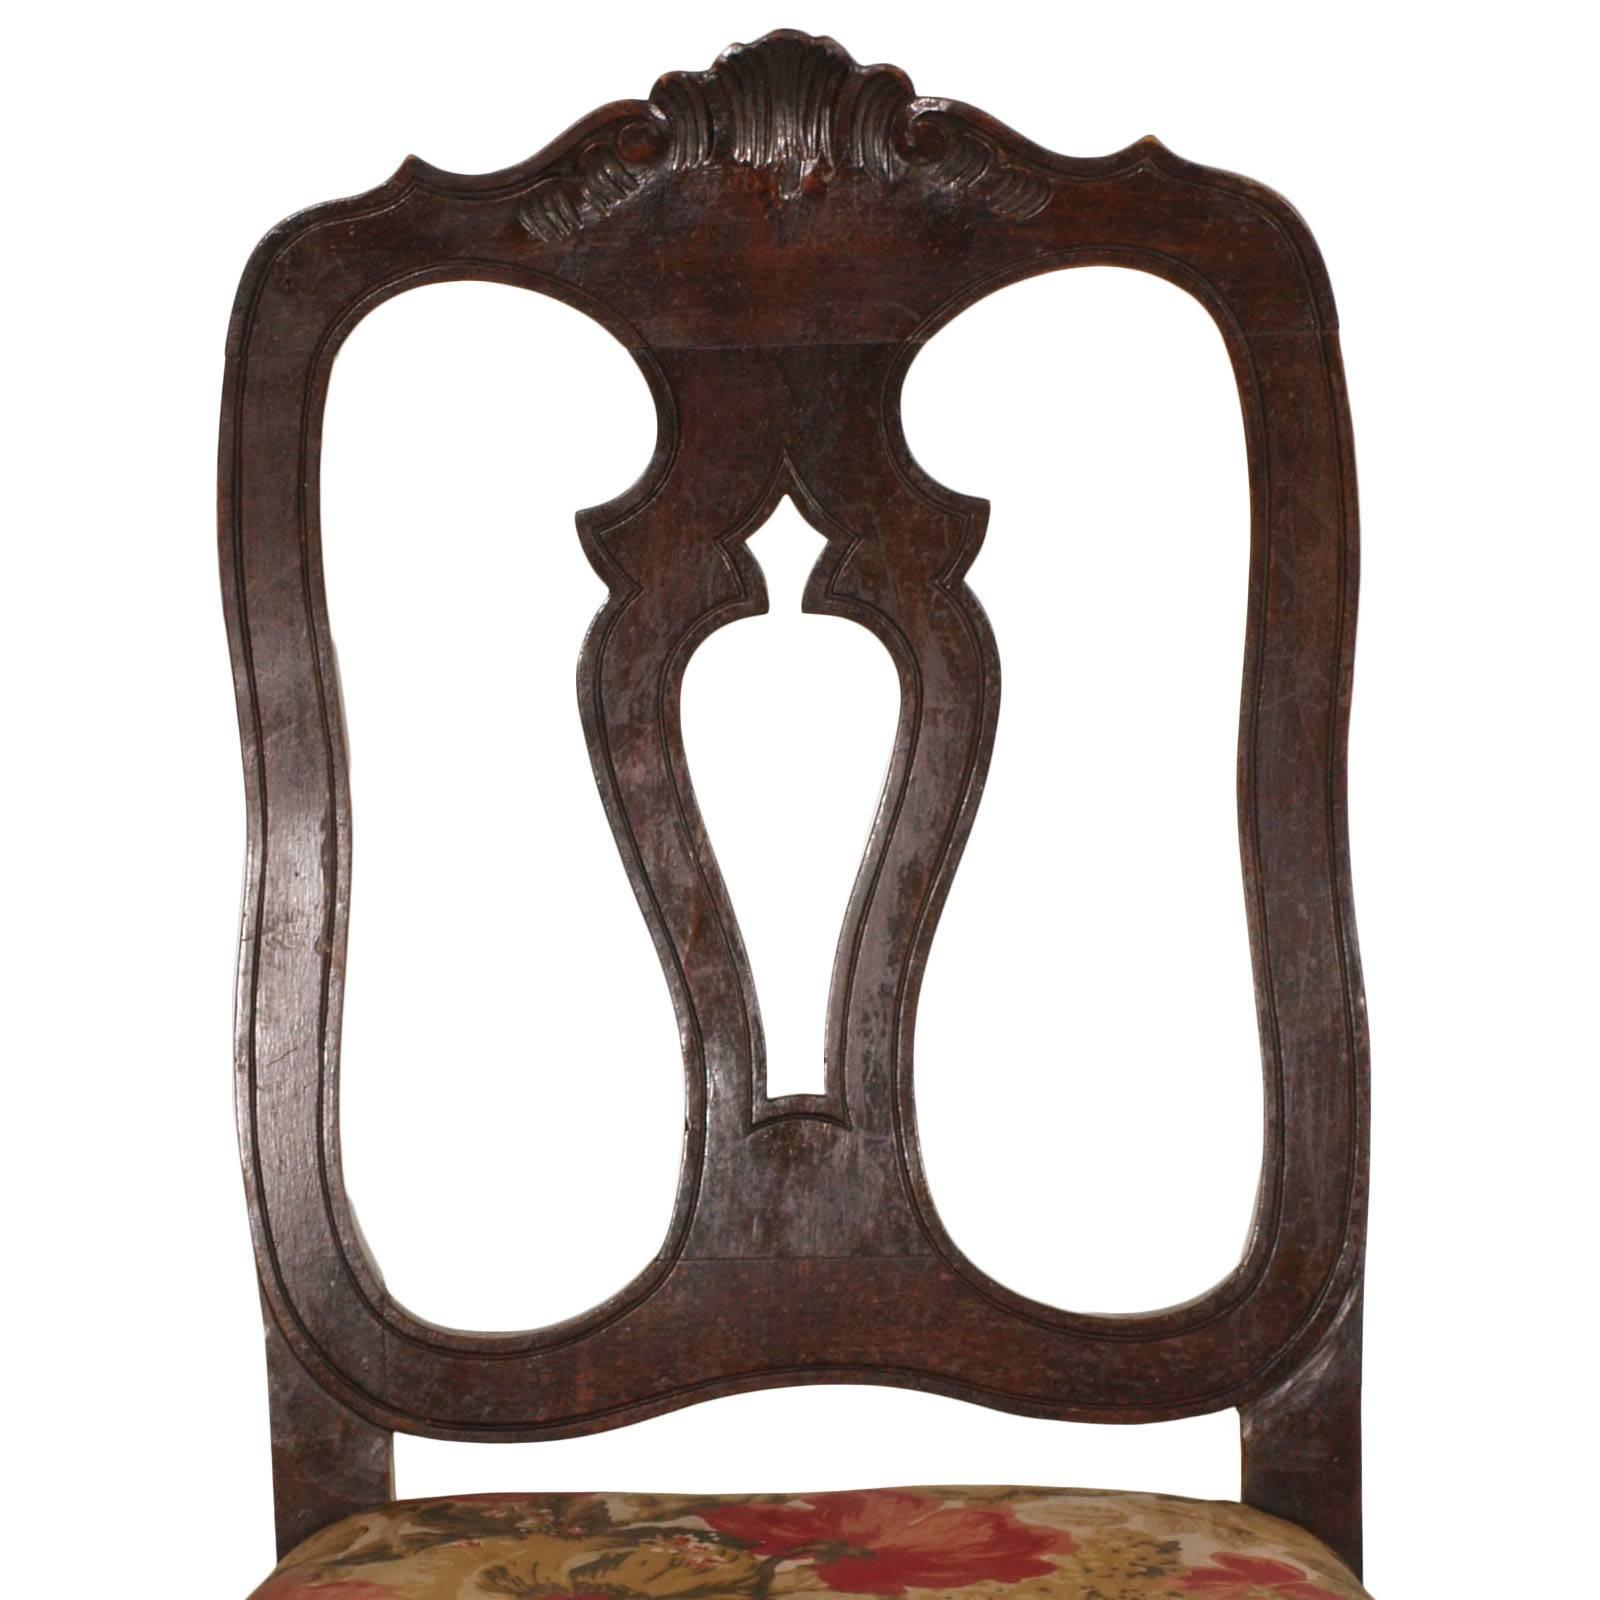 Early 20th century Venetian baroque chairs in hand-carved solid ebonized walnut. Contoured backrest, seat supported by springs and original belts of the time. Floral patterned upholstery recently replaced, in good condition.

Measures in cm: H